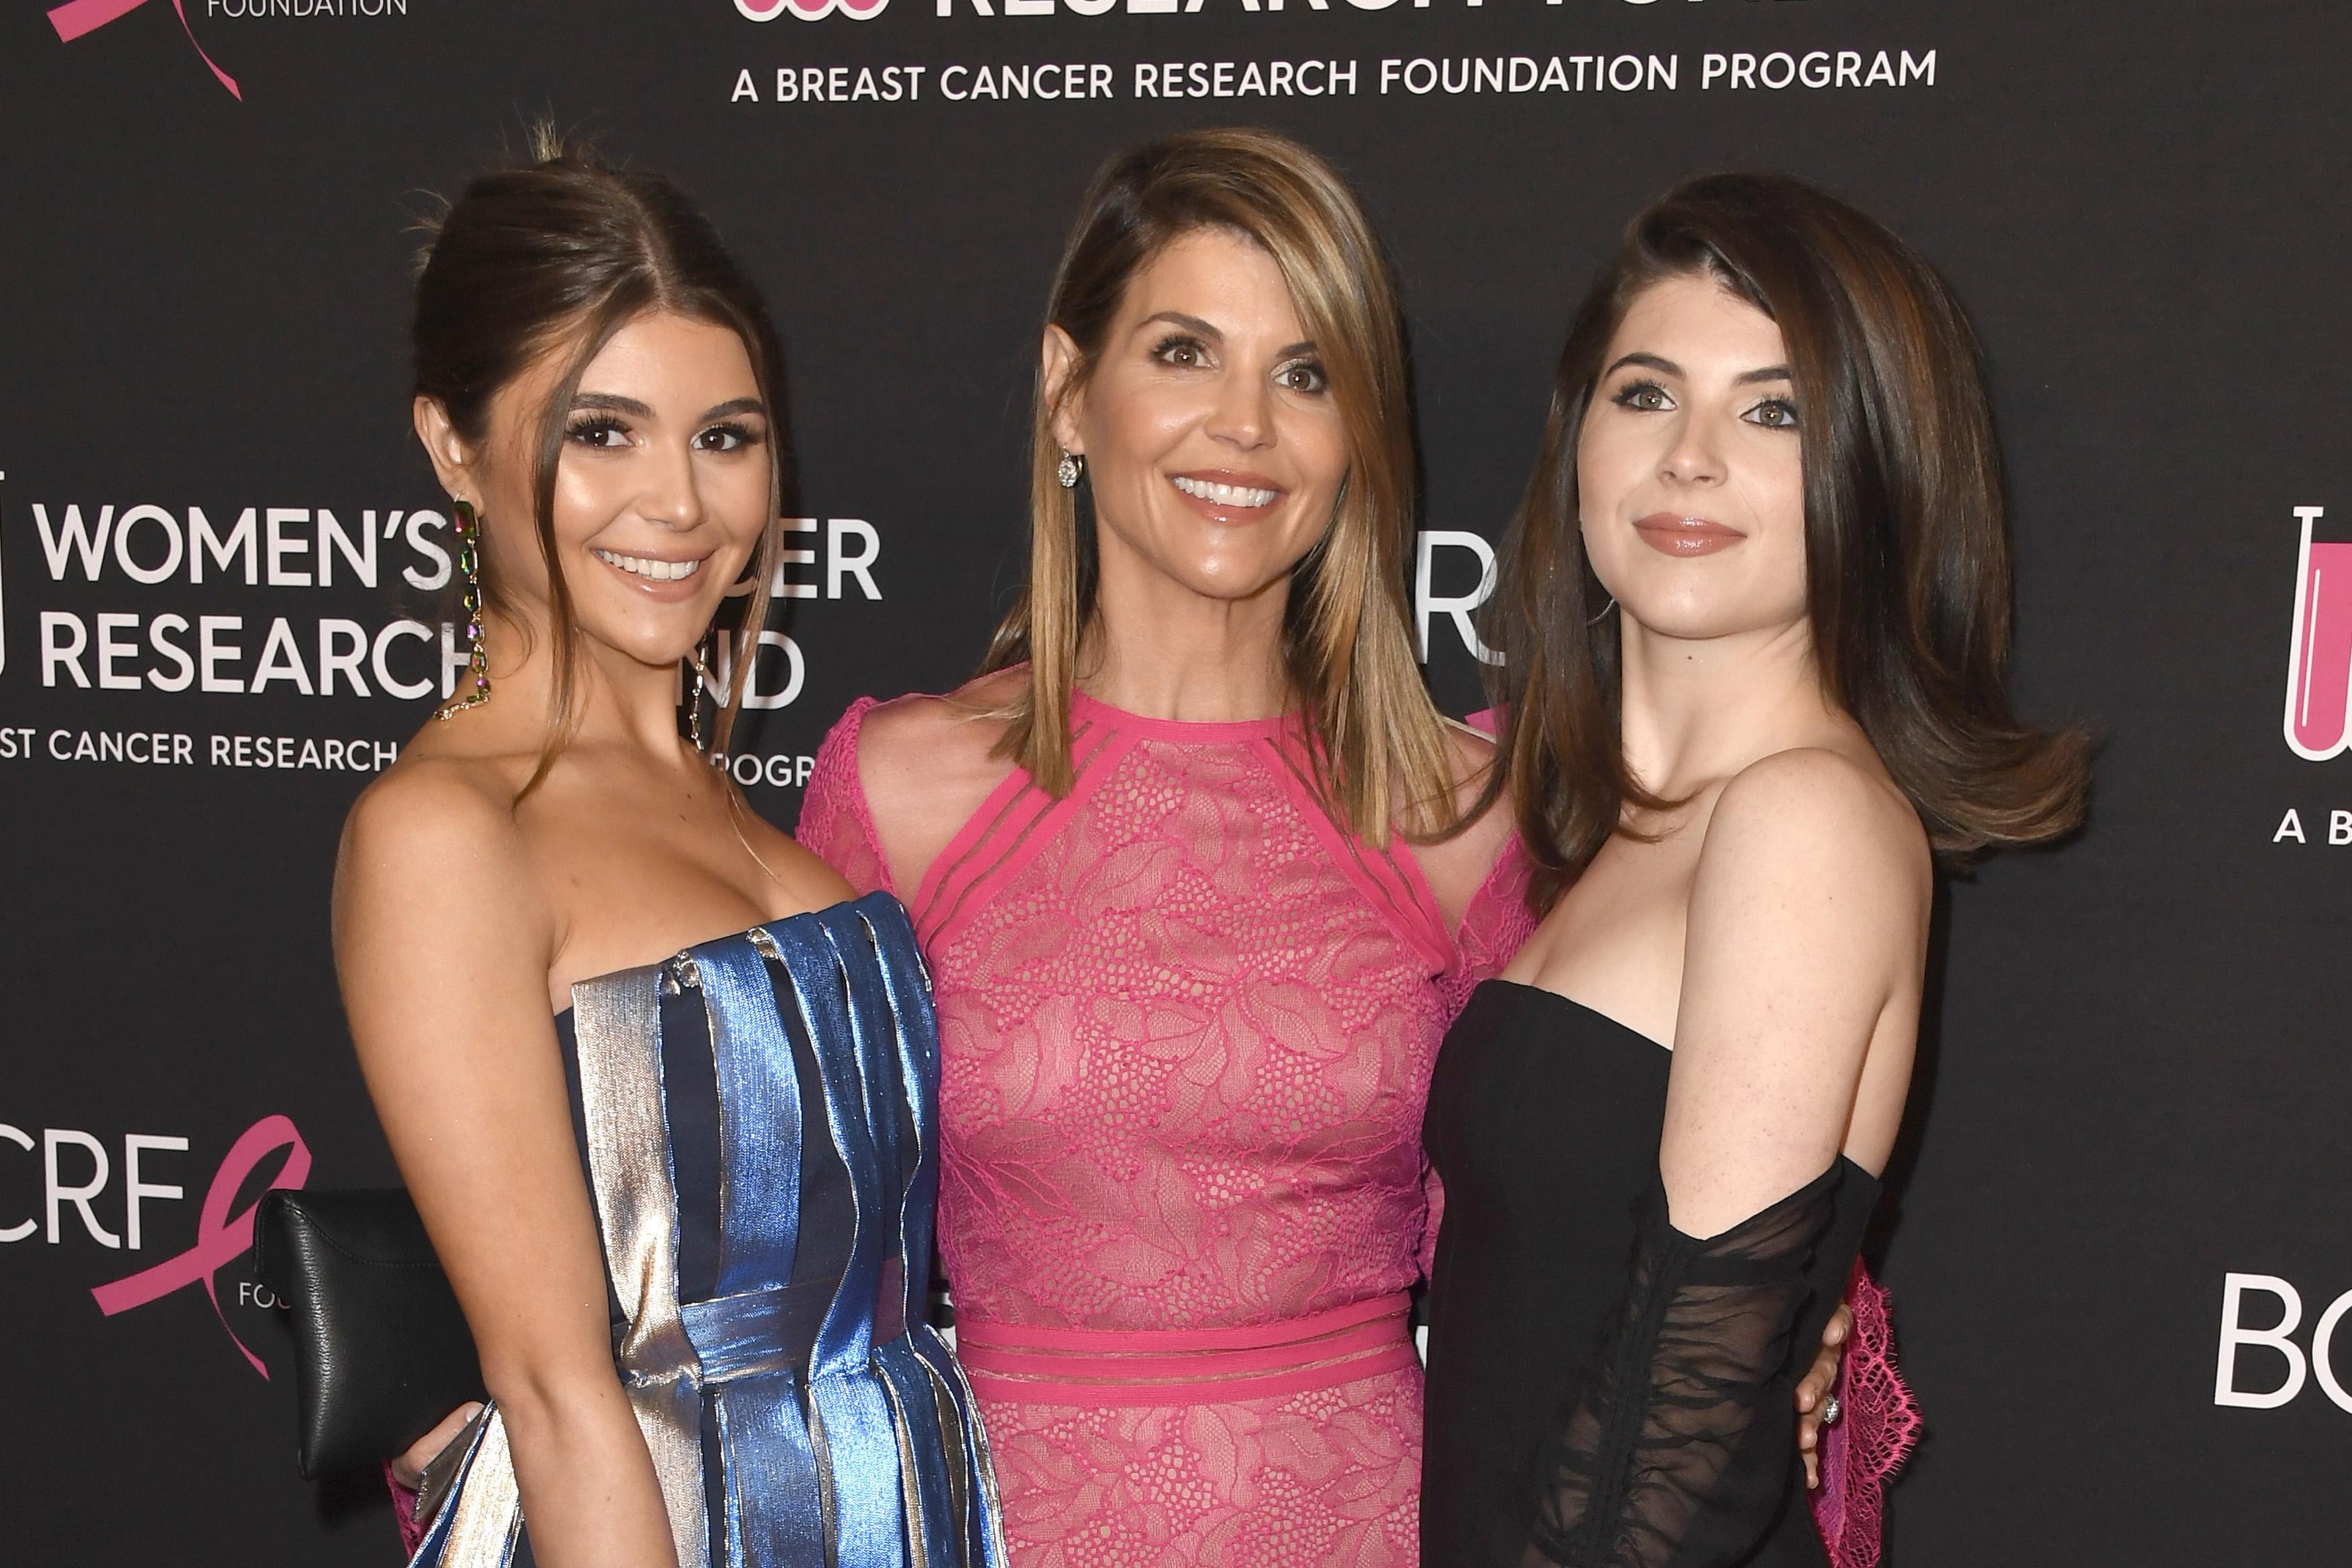 Olivia Jade Giannulli, Lori Loughlin, and Isabella Rose Giannulli standing together in formalwear in front of a step-and-repeat for the gala they're attending behind them.